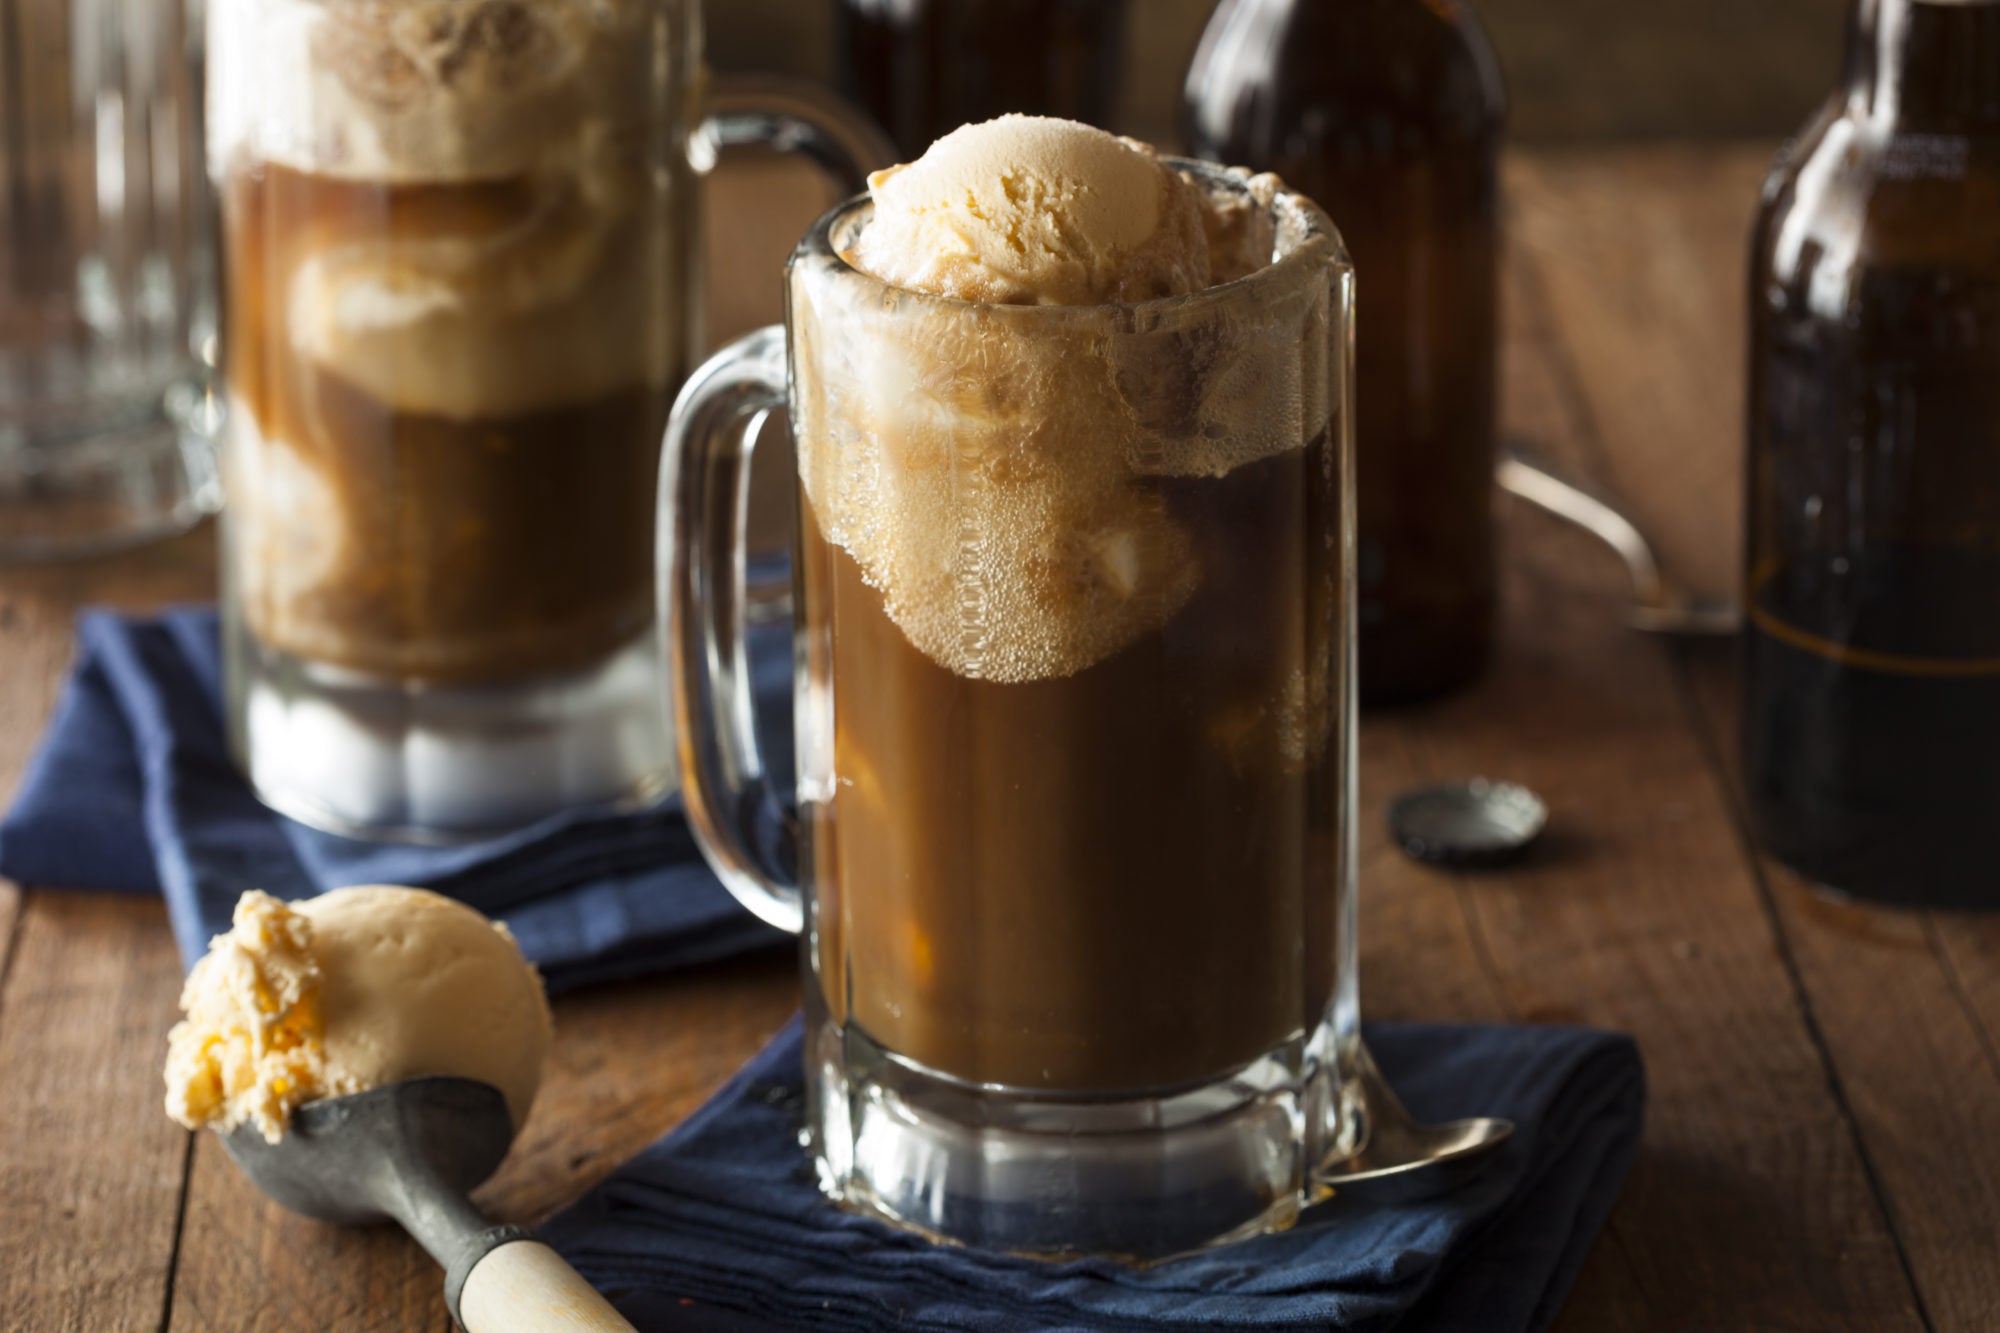 What's in Homemade Root Beer?